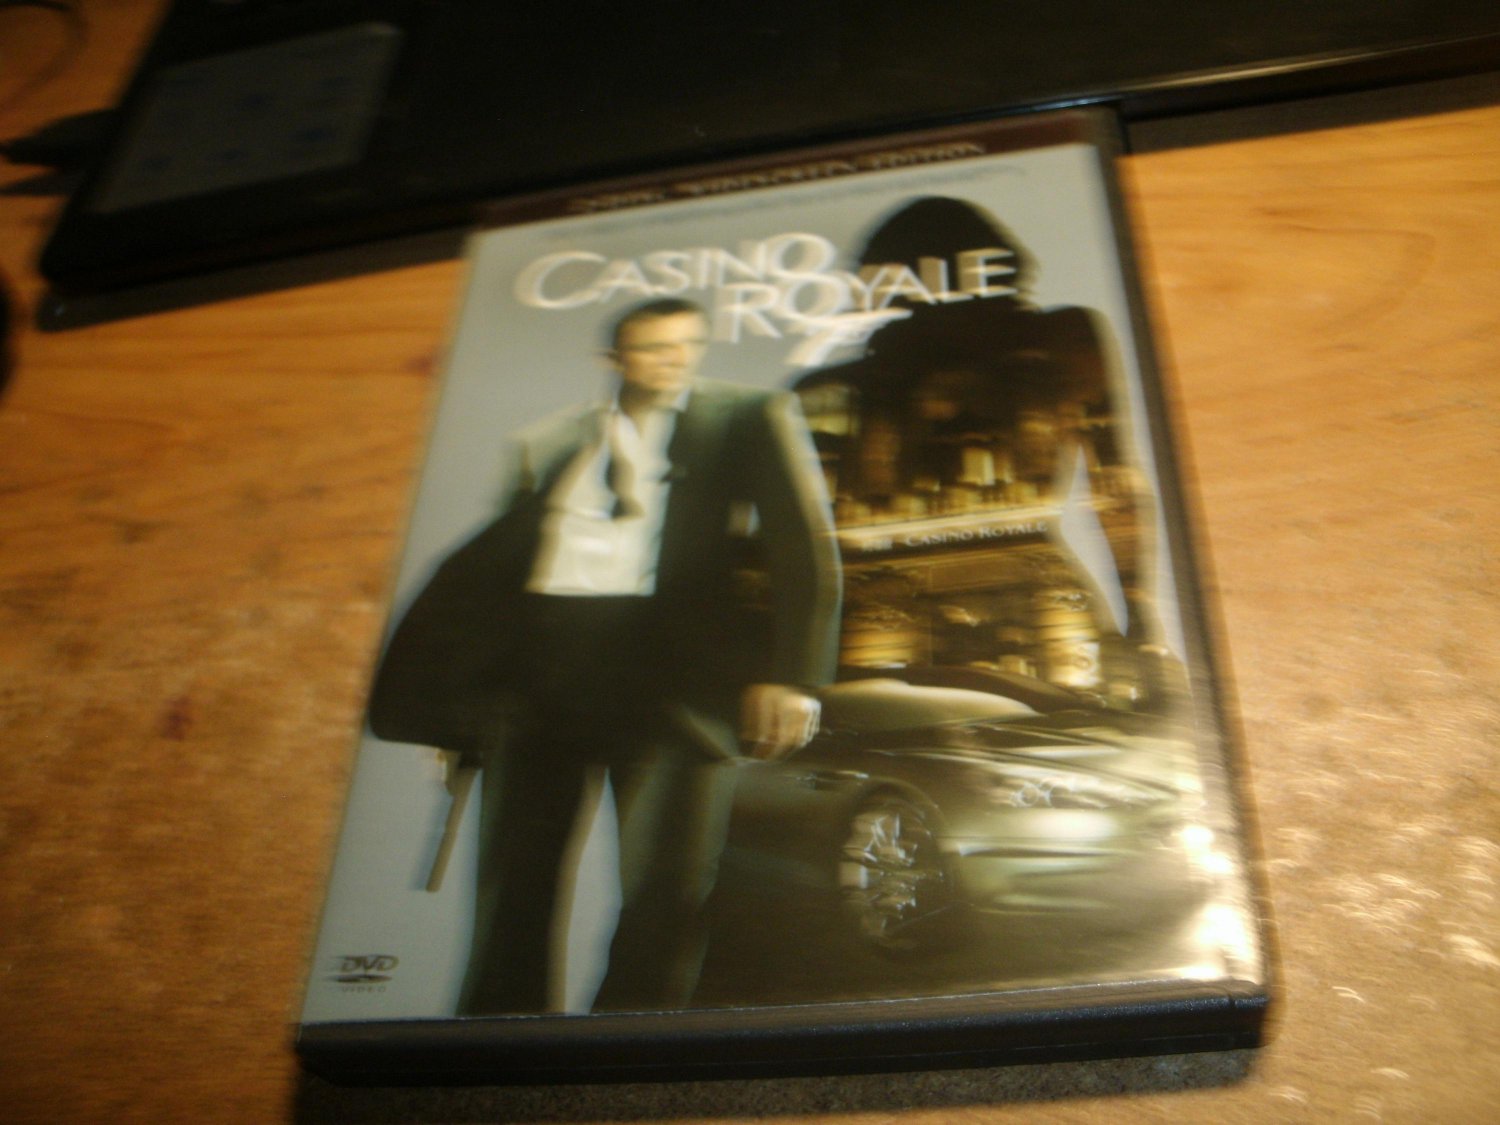 used 2 dvd set-ws-casino royale-oo7 james bond-mgm-pg-13-action